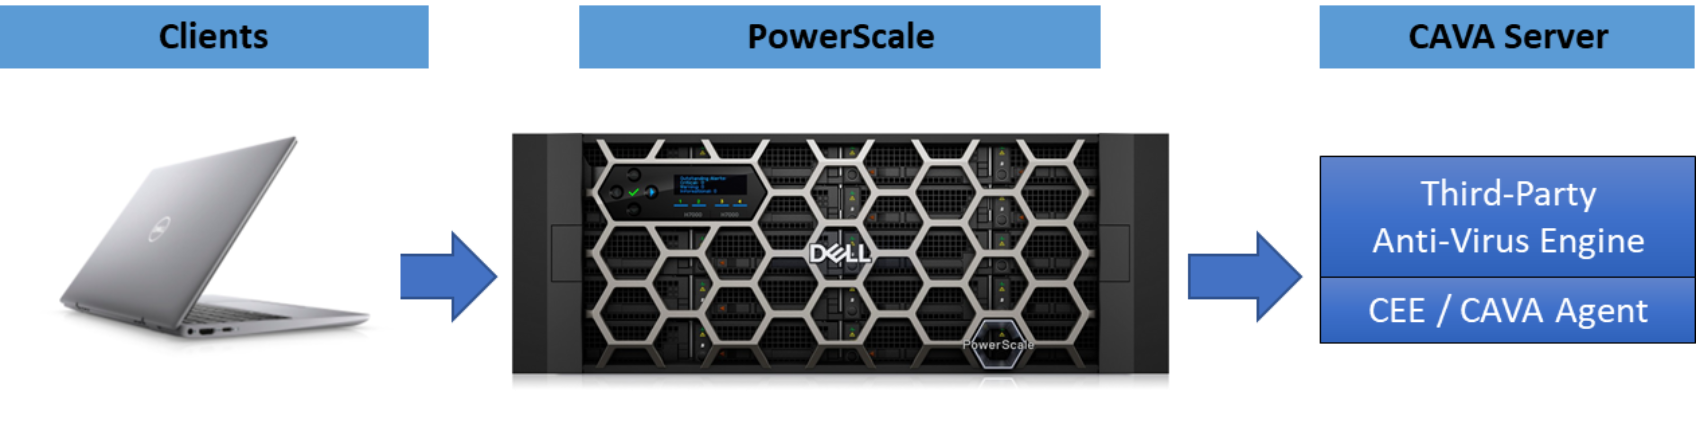 A figure illustrating the PowerScale and Cava server interaction.